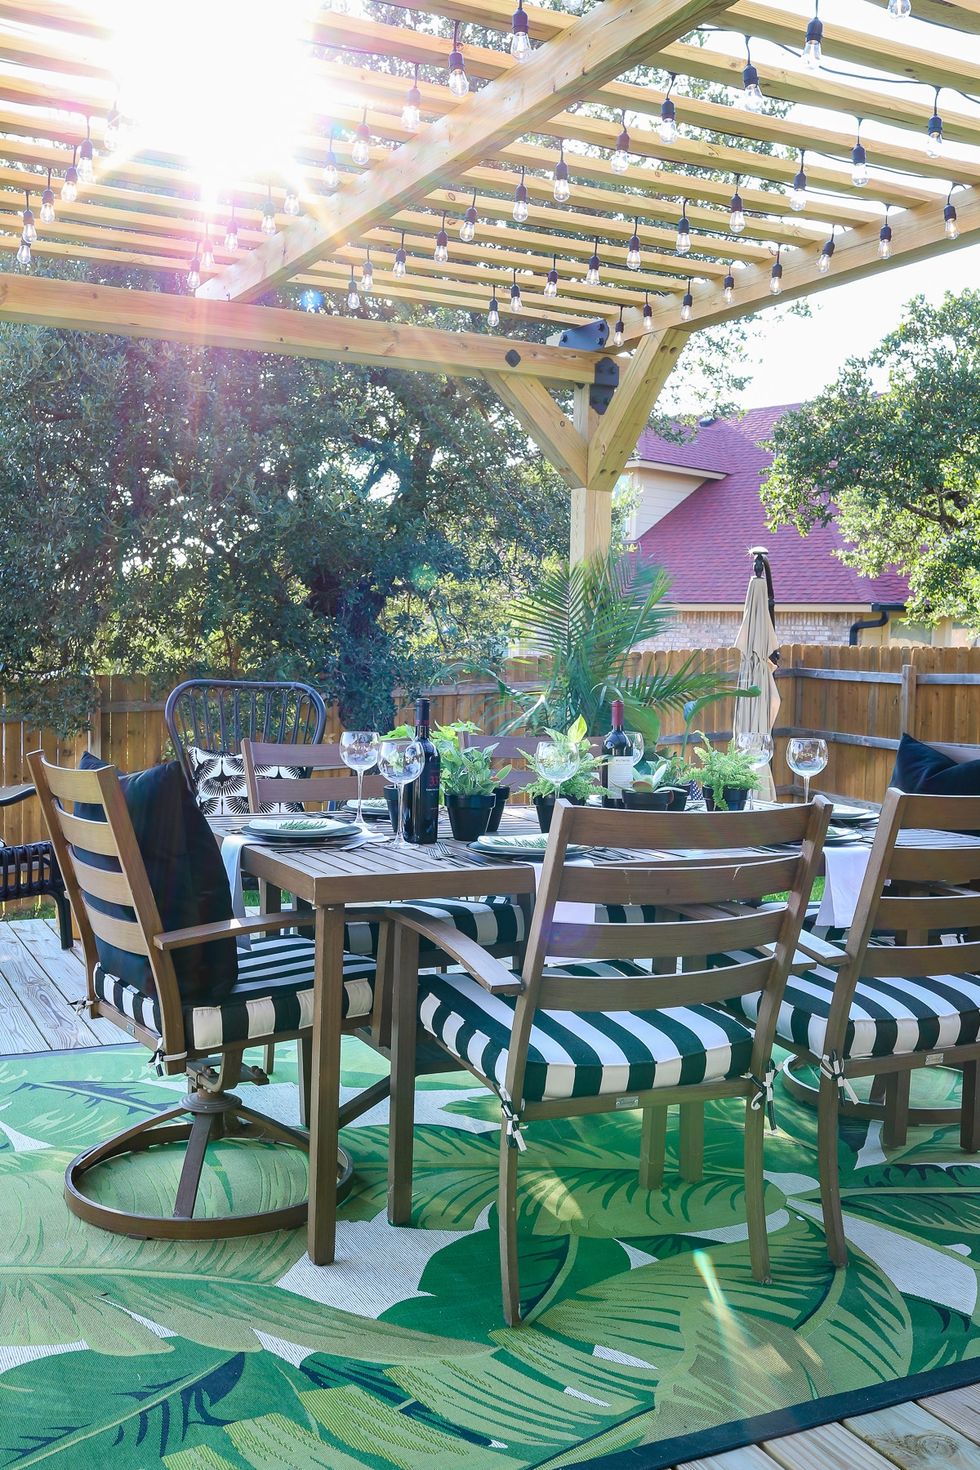 pergola with string lights over an outdoor patio